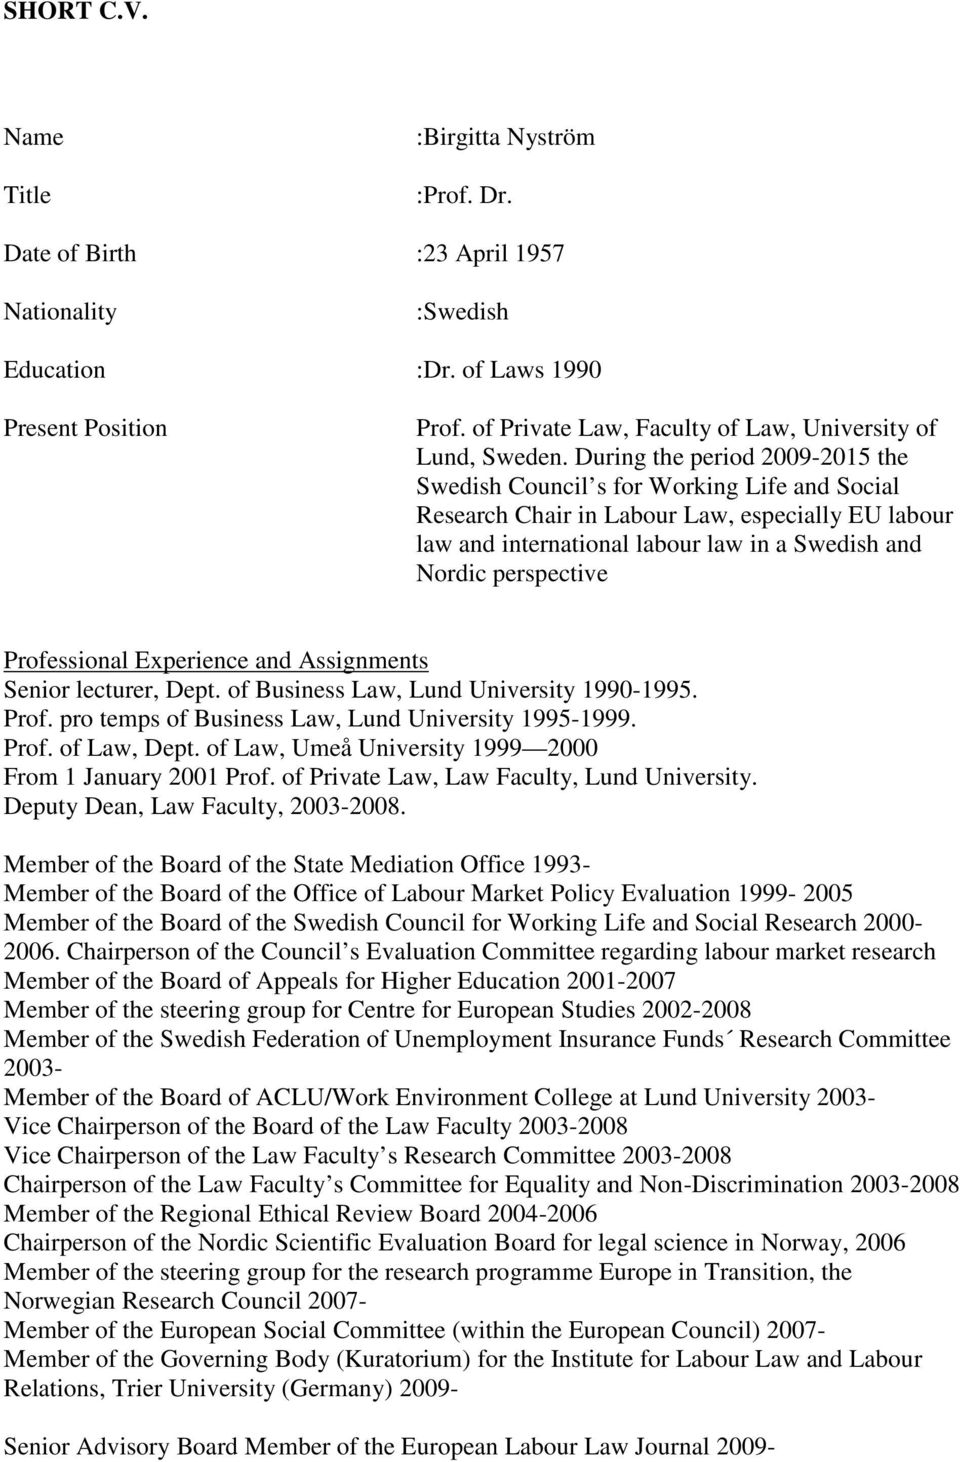 During the period 2009-2015 the Swedish Council s for Working Life and Social Research Chair in Labour Law, especially EU labour law and international labour law in a Swedish and Nordic perspective